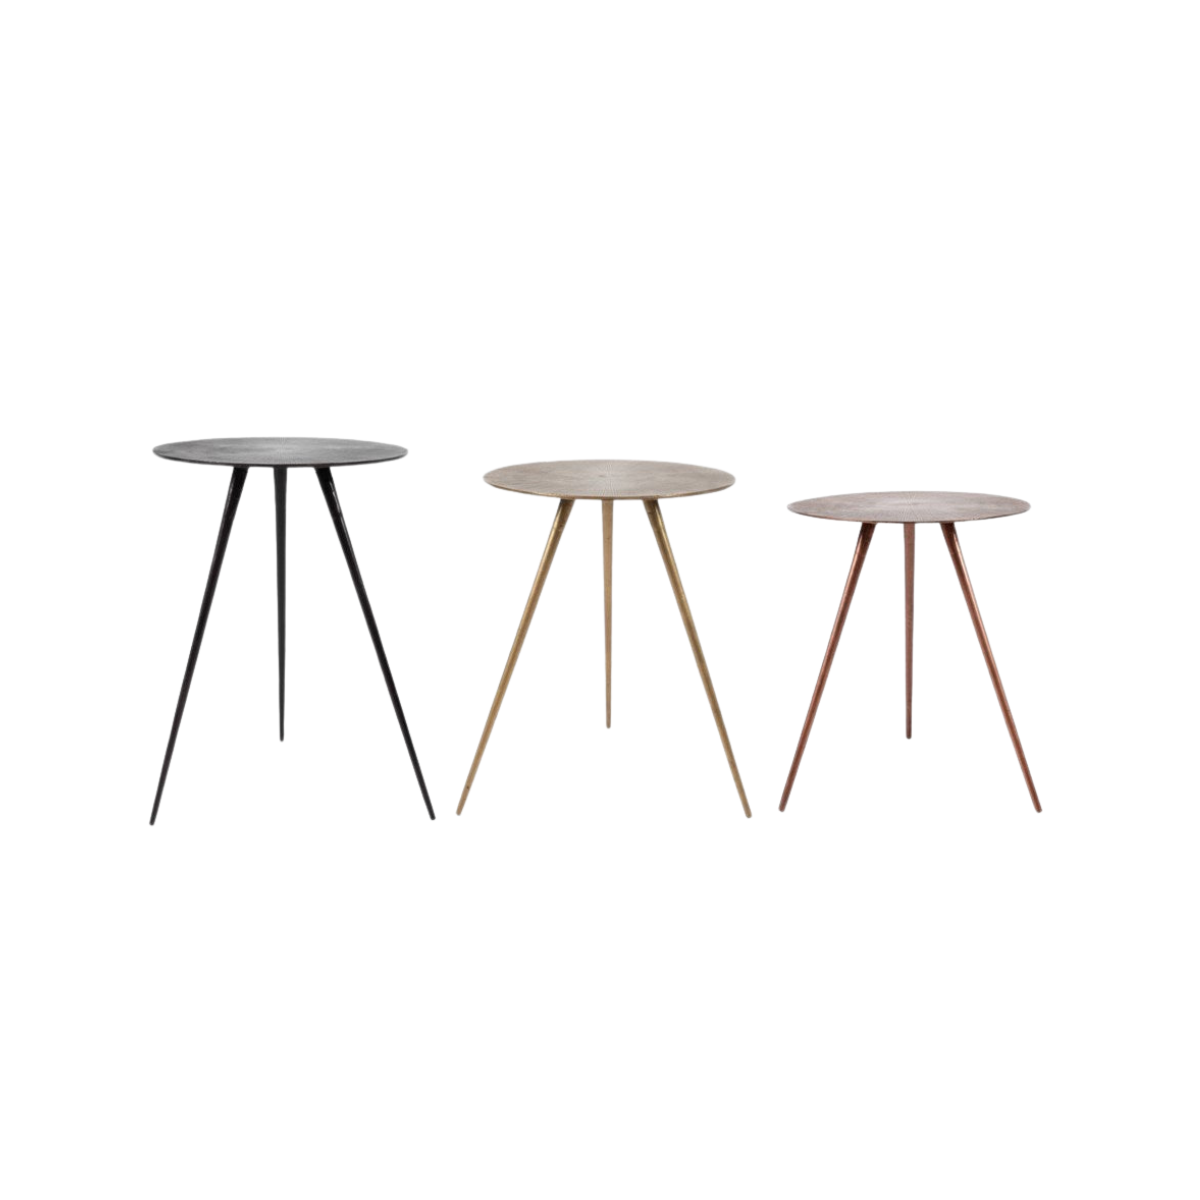 Carly Accent Tables - 3 Piece Set